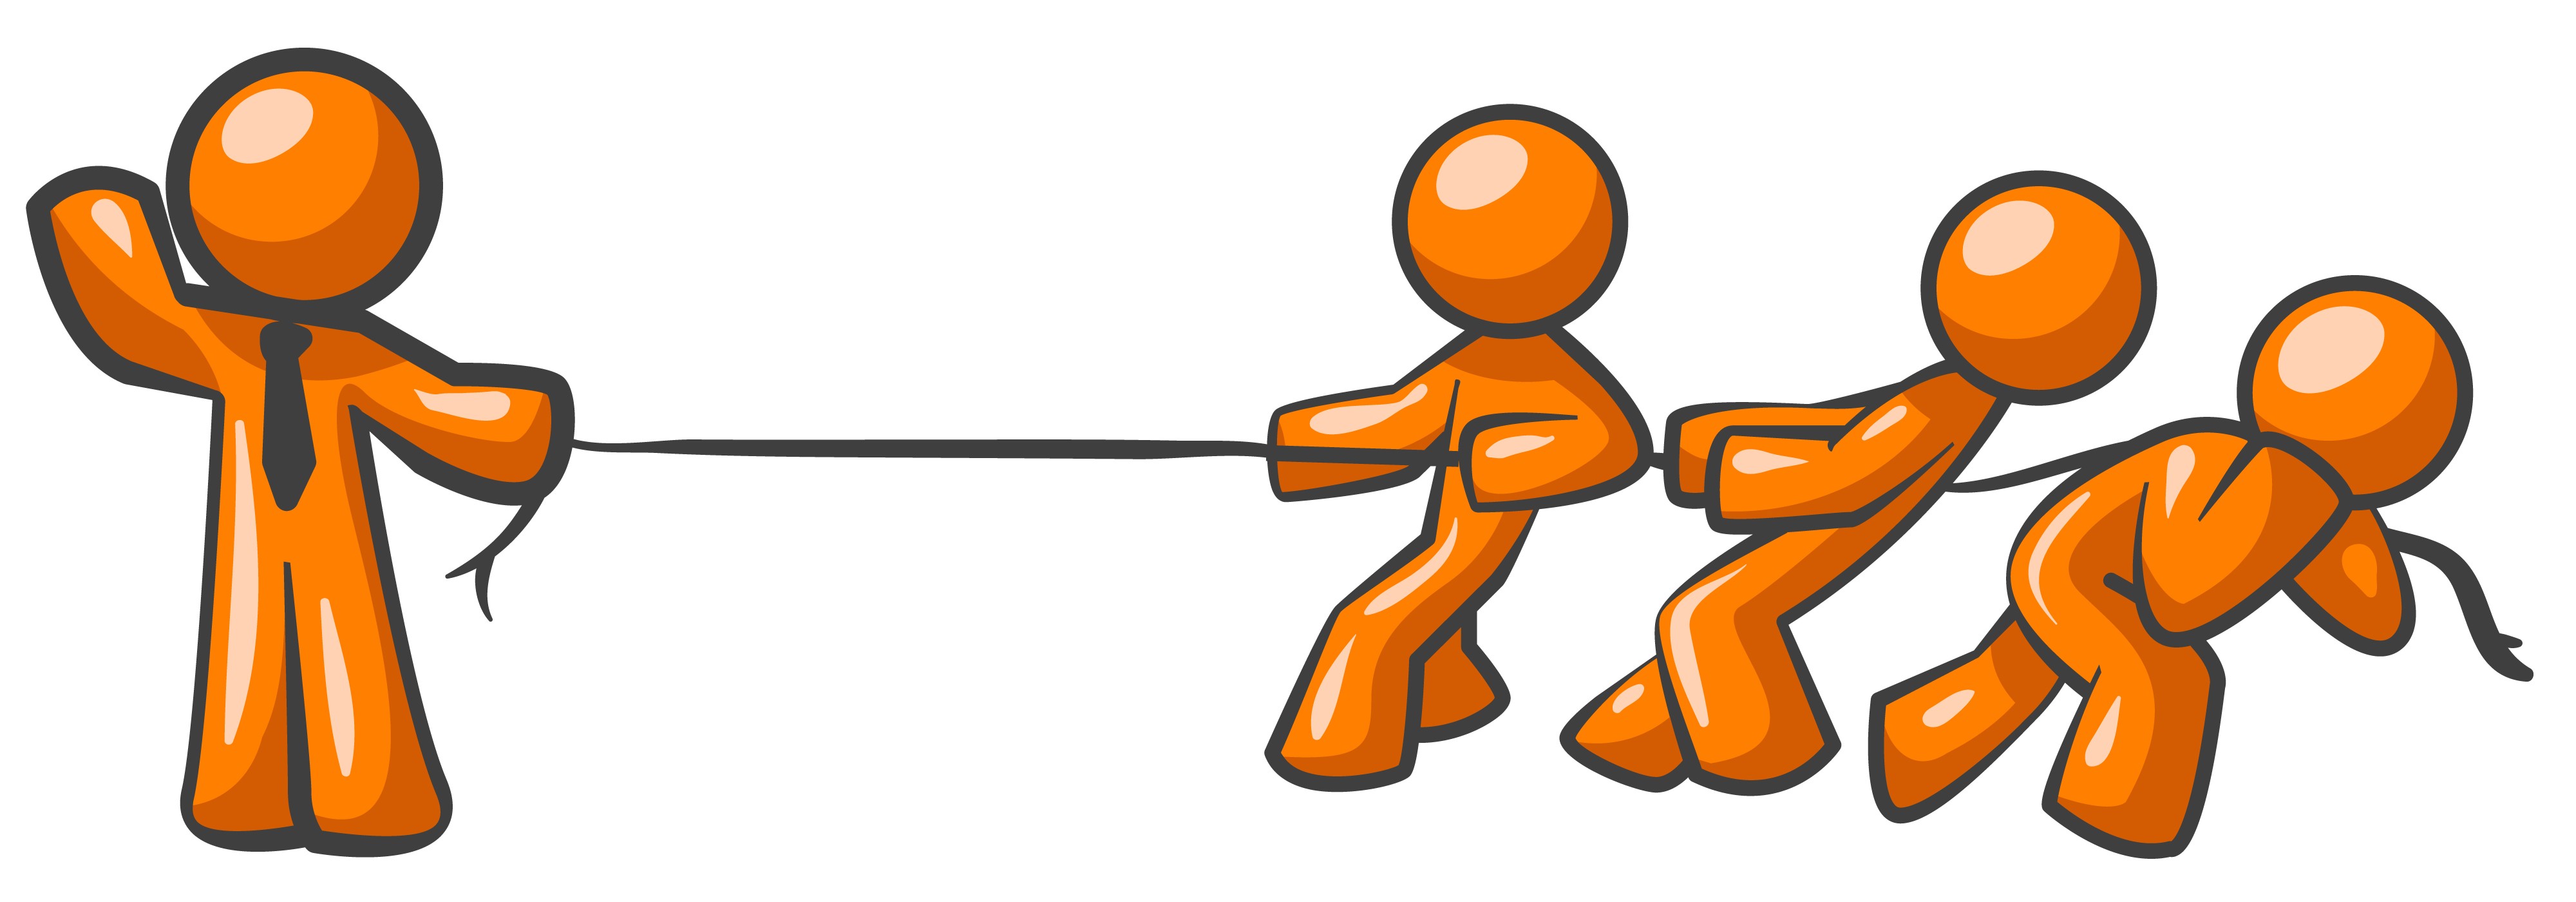 Clip Arts Related To : tug of war clip art. 